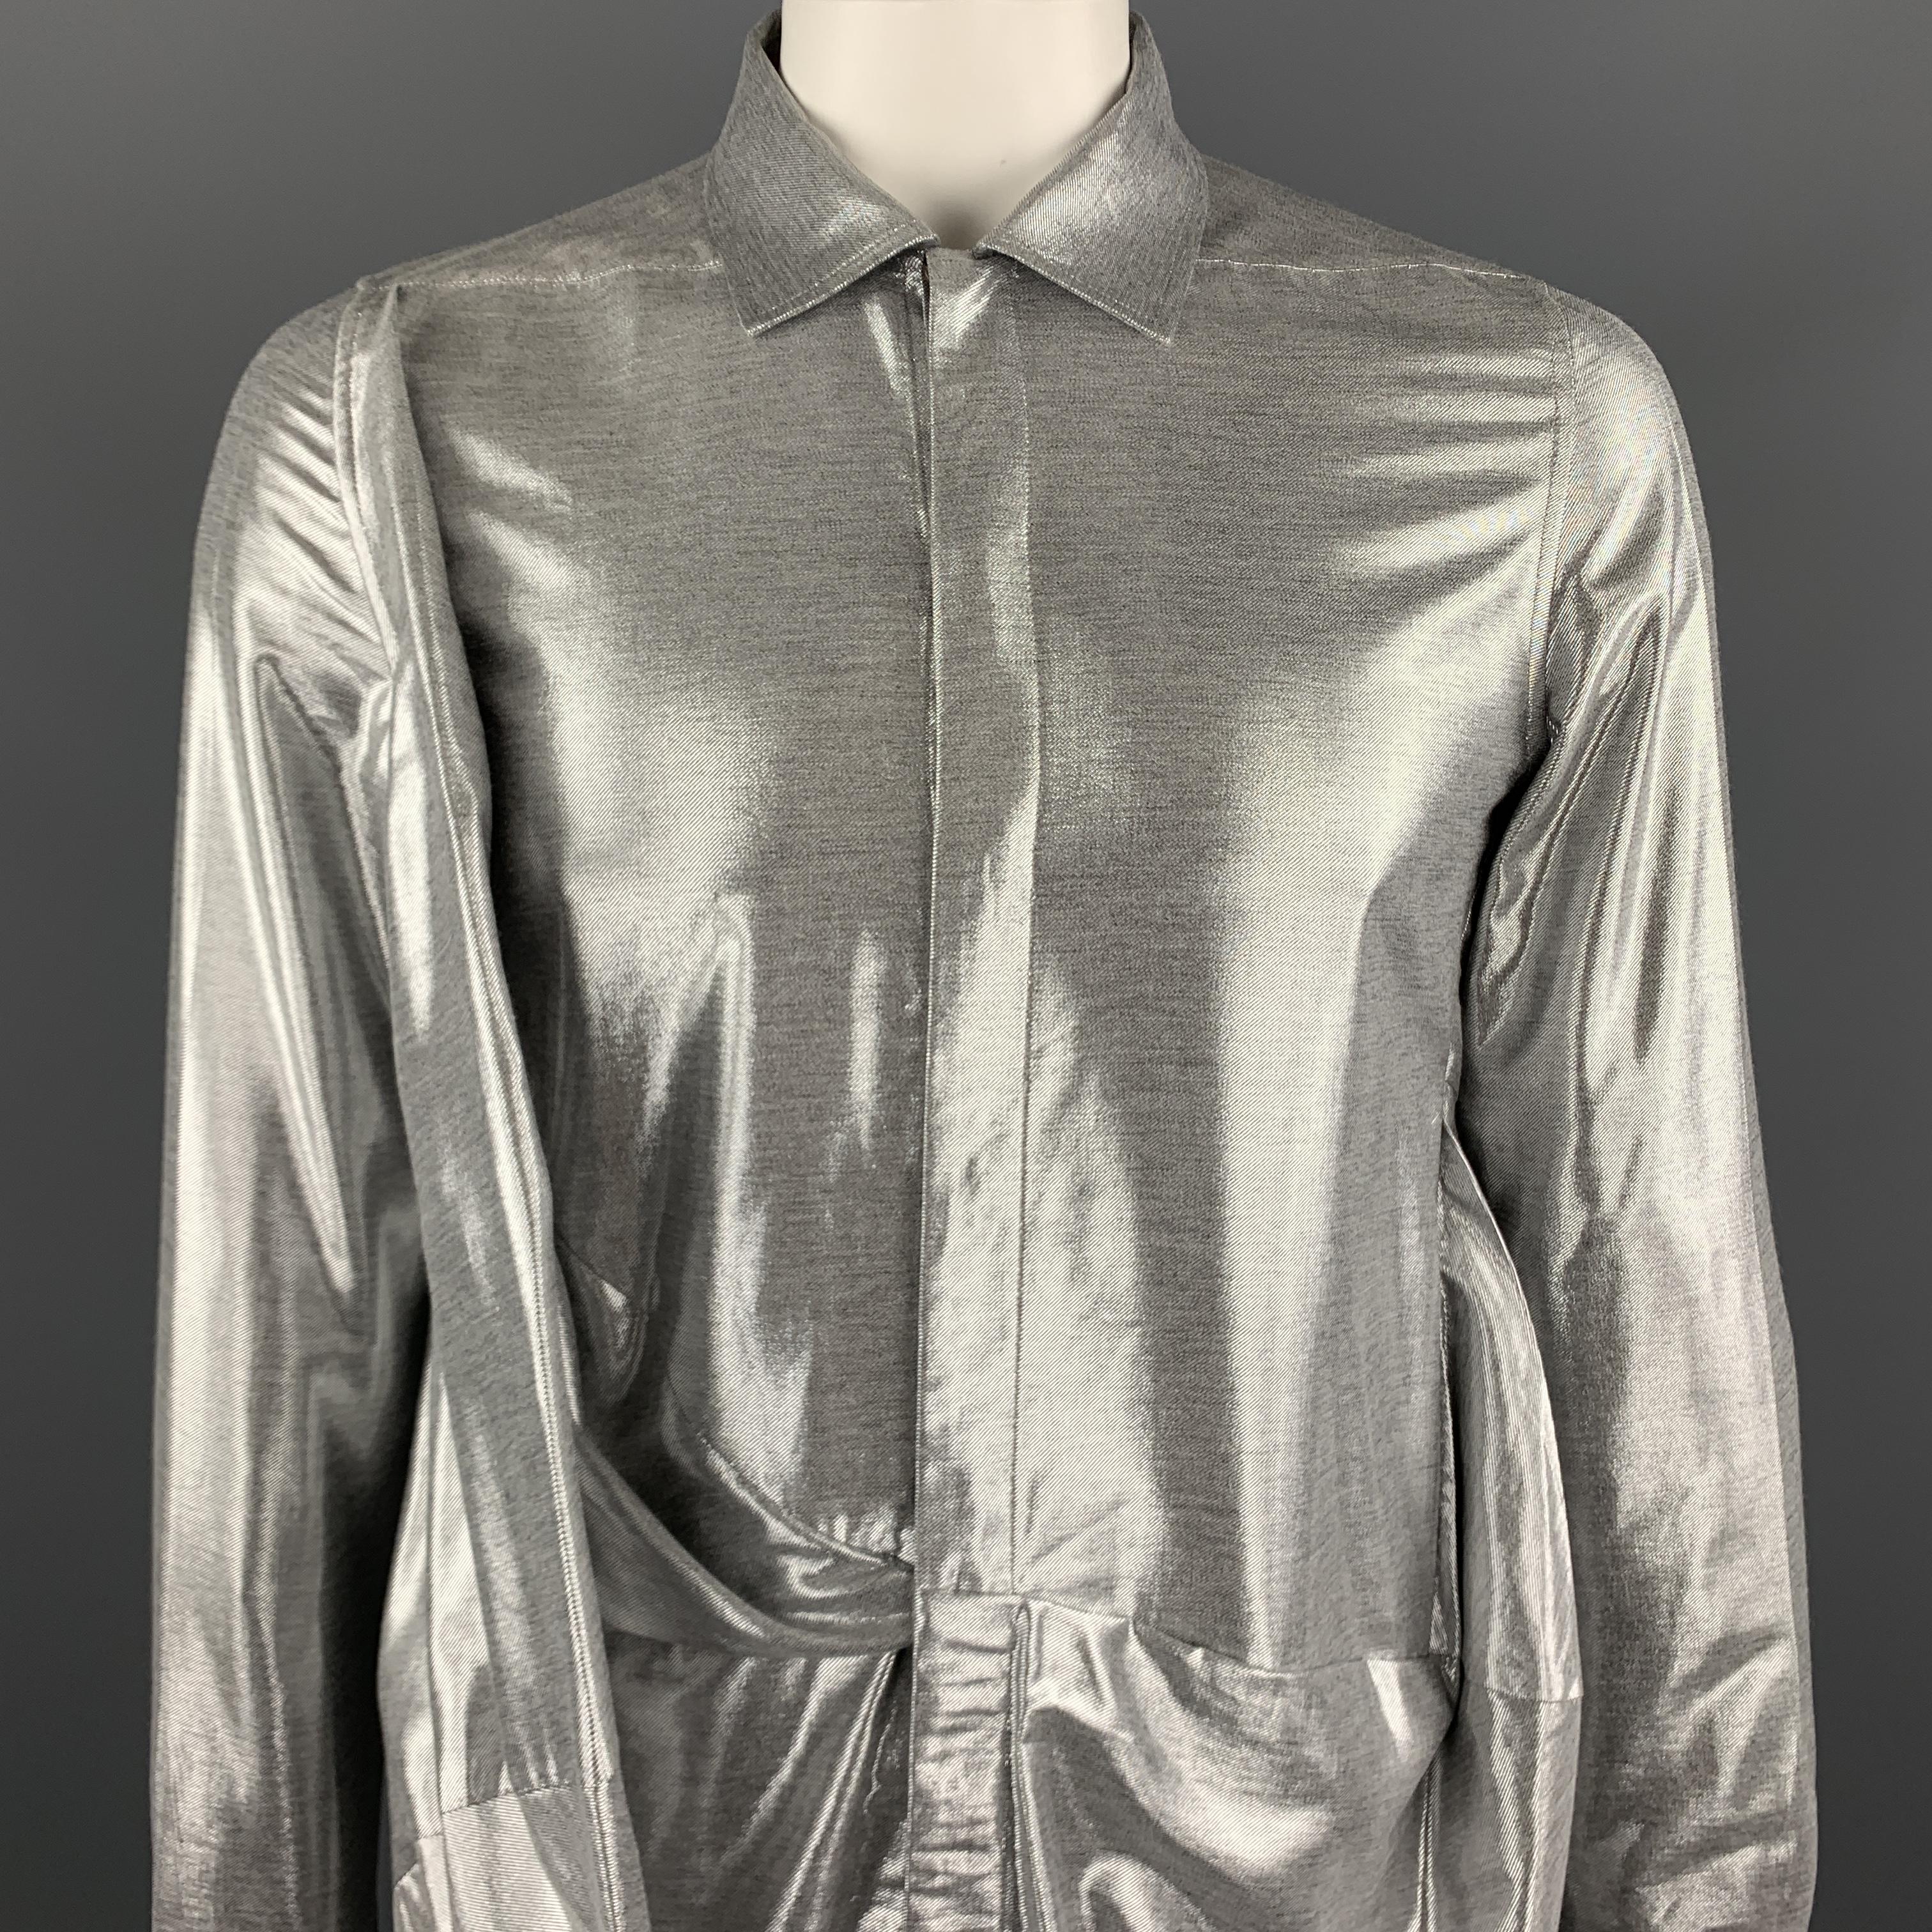 RICK OWENS F/W 19 Long Sleeve Shirt comes in a silver metallic viscose blend material, with a classic collar, hidden buttons at closure, a draped front, a bubble asymmetrical hem, and buttoned cuffs. Made in Italy.

New with Tags.
Marked: US